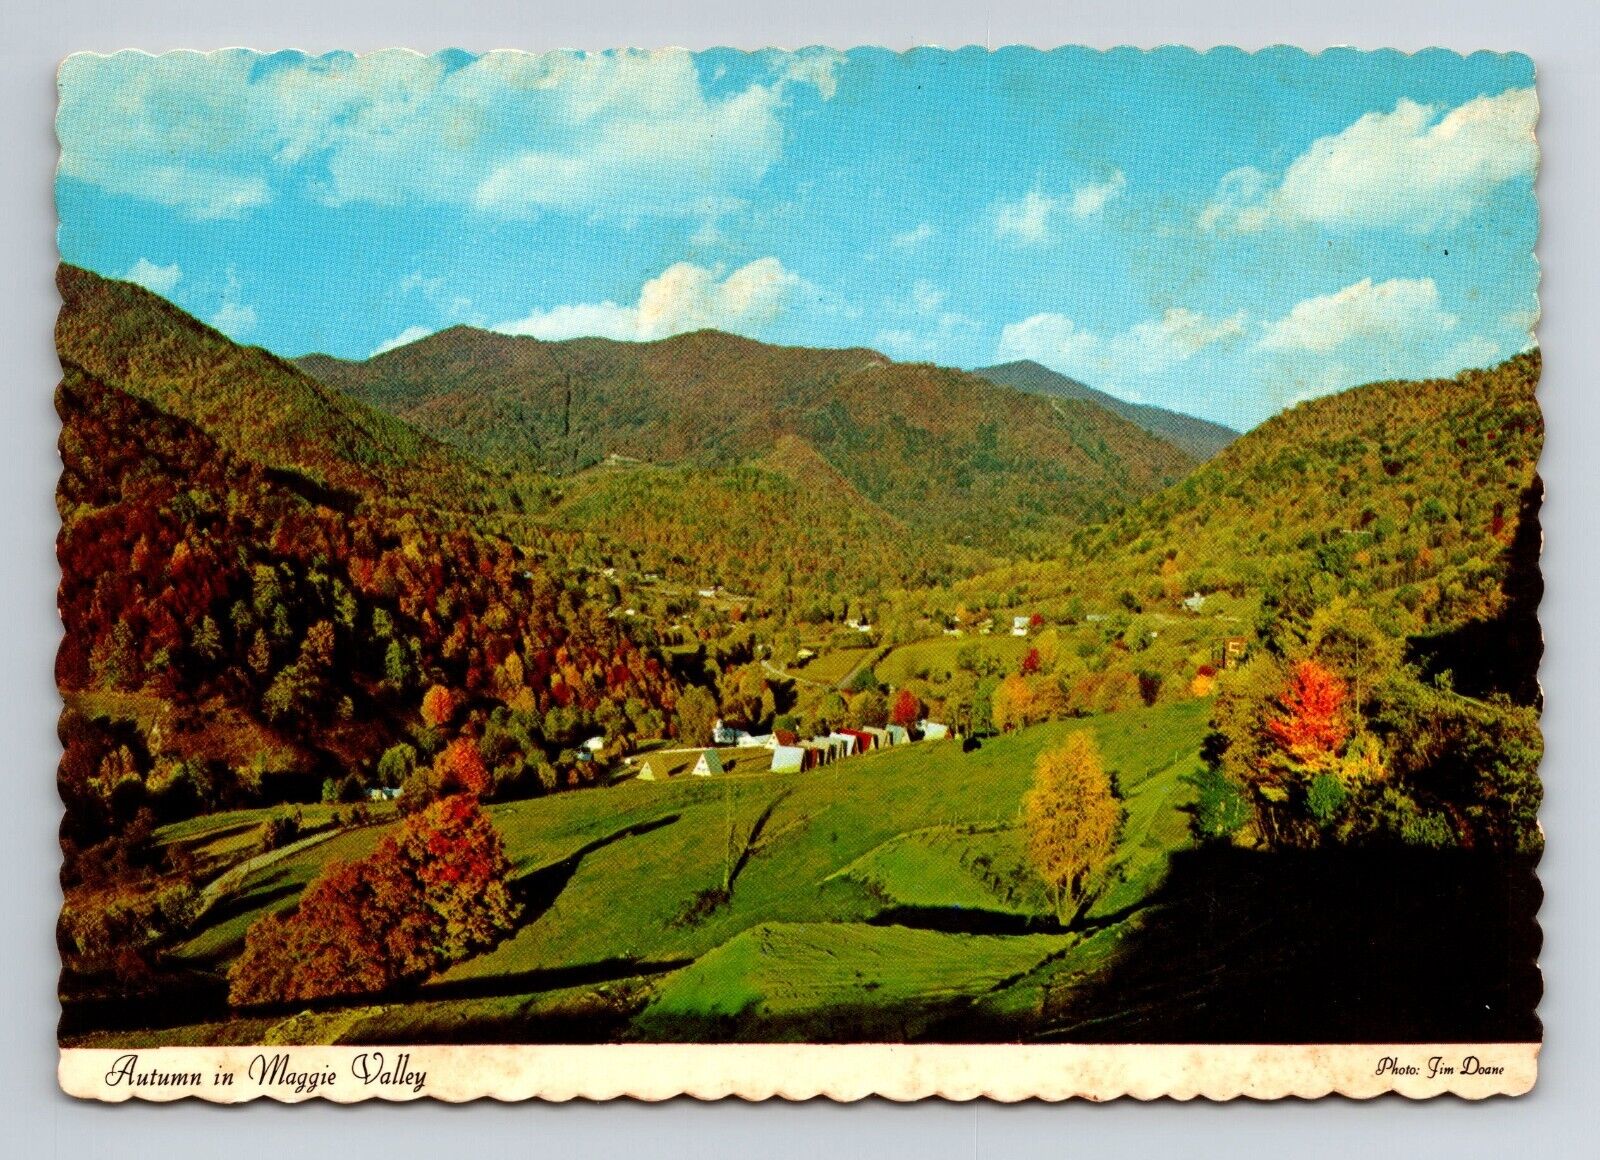 5 7/8x4 in postcard Maggie Valley, The Great Smoky Mountains National unposted